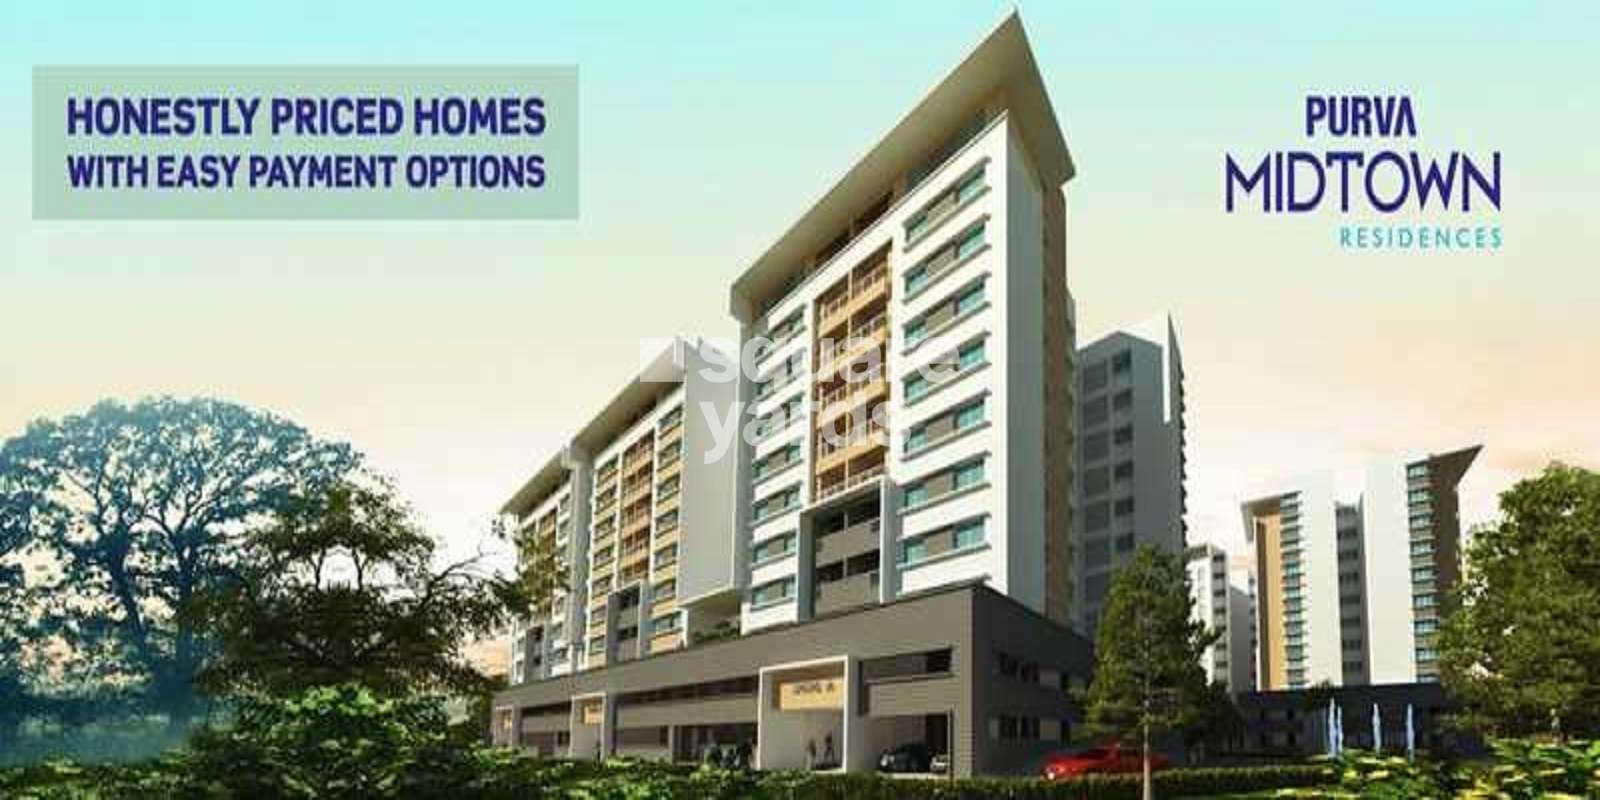 Purva Midtown Residences Cover Image